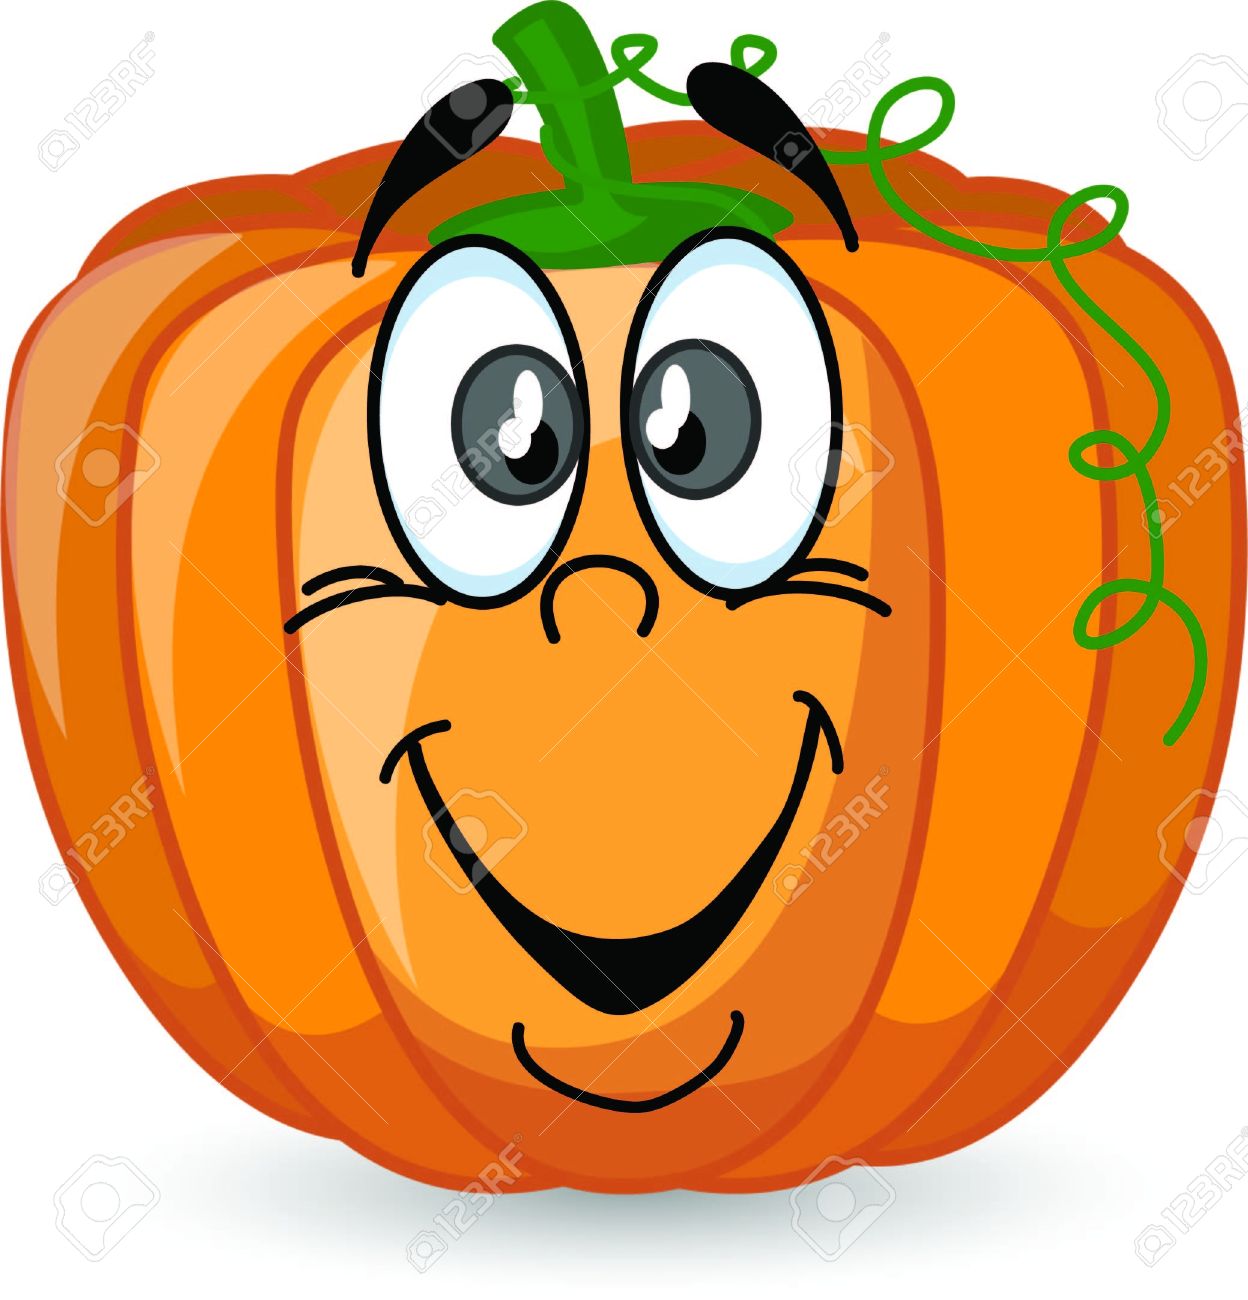 Cartoon Pumpkin Pictures | Free download on ClipArtMag